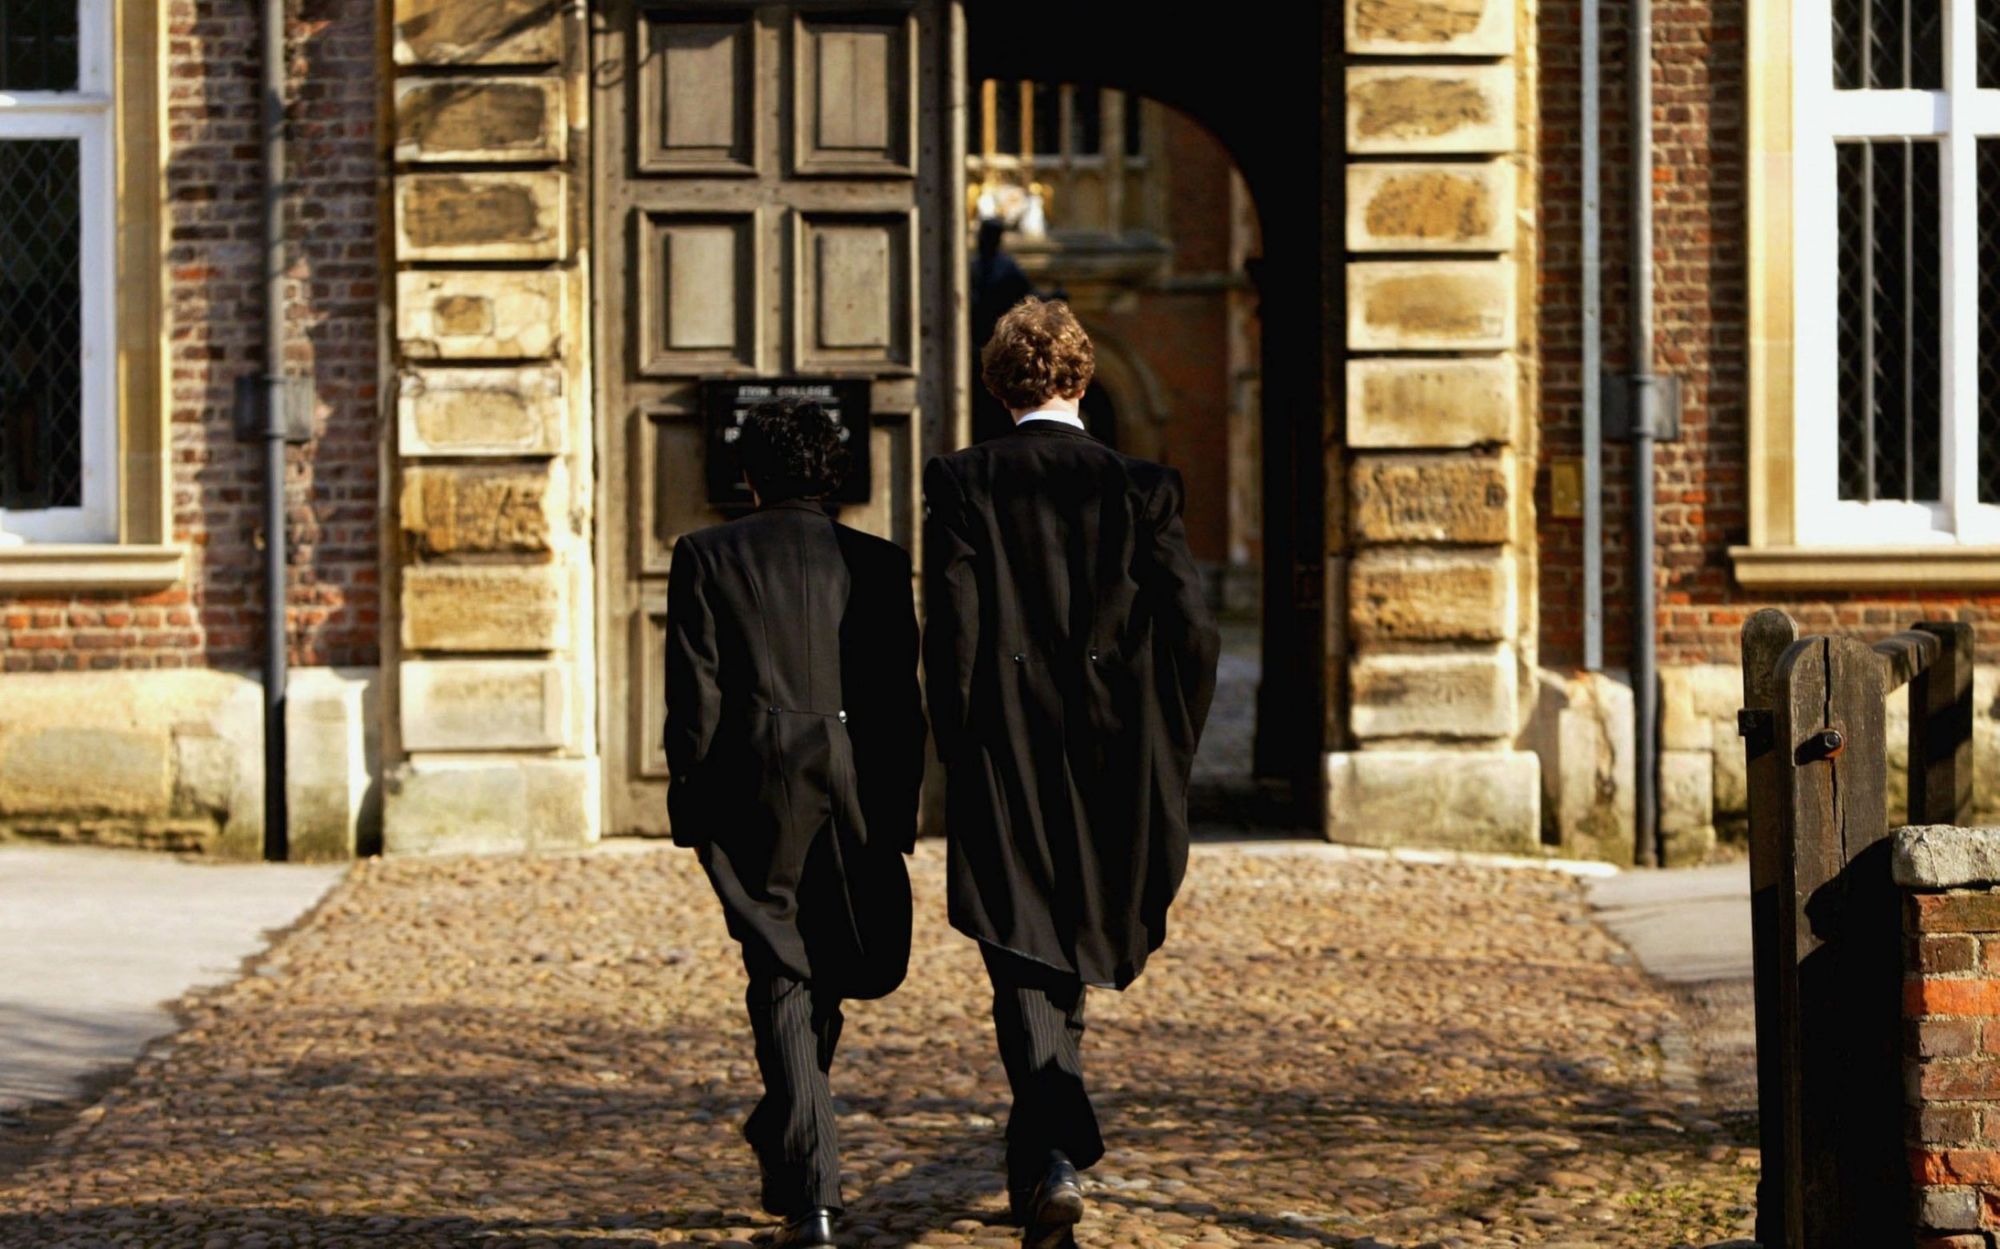 Eton College urged not to succumb to outside pressure over sacking of teacher